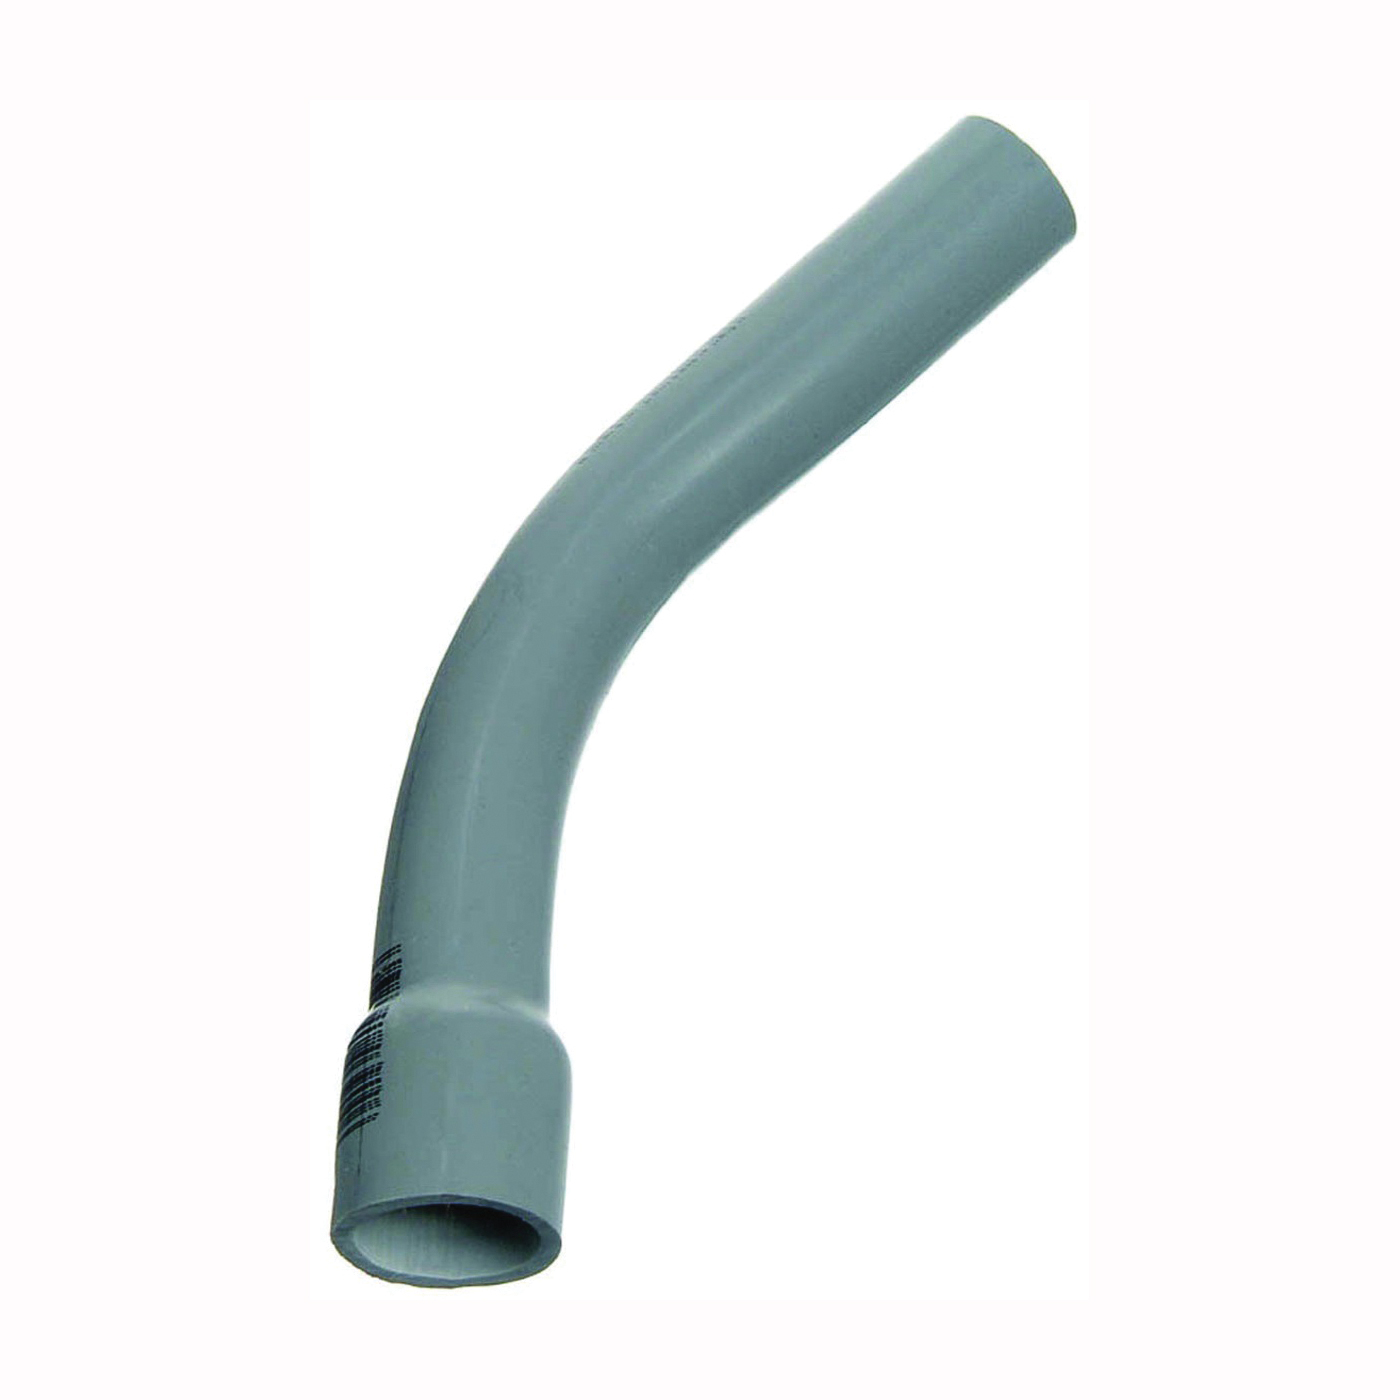 UA7AHB-CAR Elbow, 1-1/2 in Trade Size, 45 deg Angle, SCH 40 Schedule Rating, PVC, Bell End, Gray